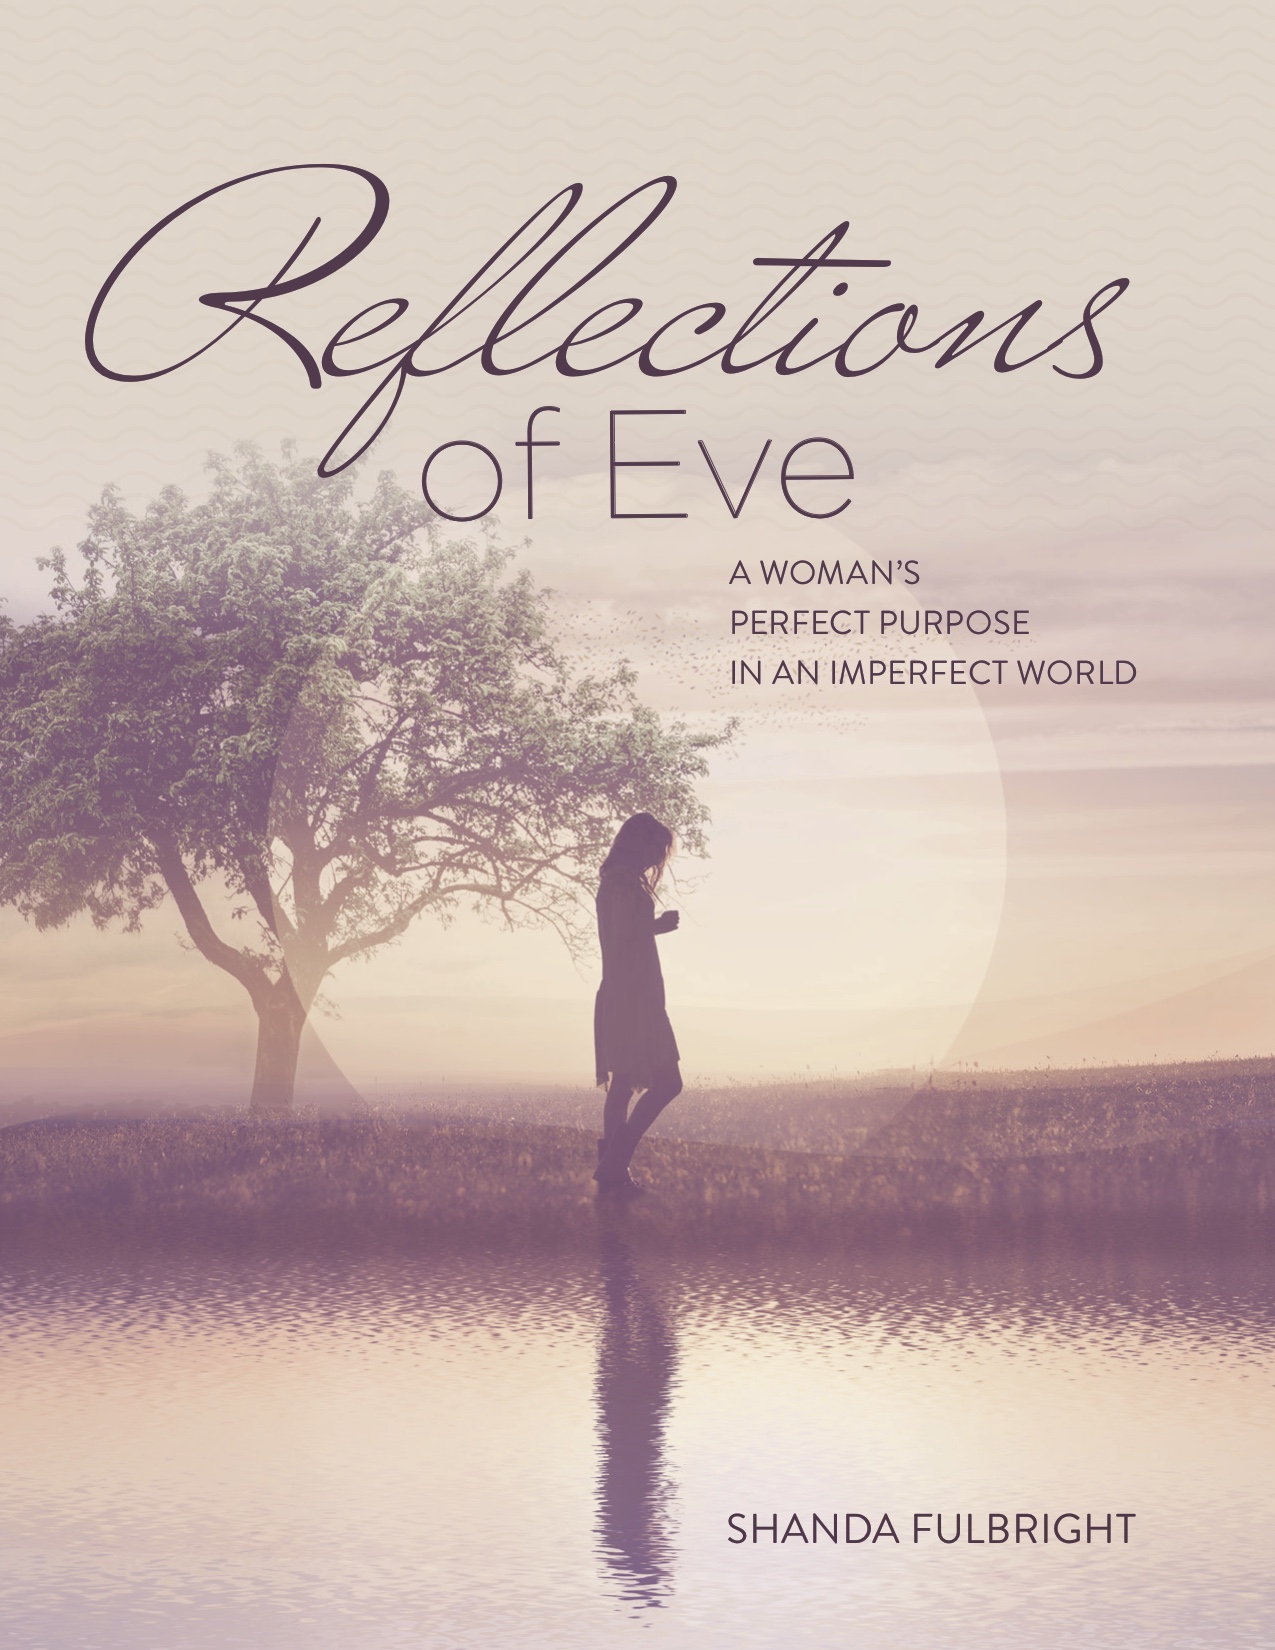 Reflections of Eve Book Cover PROOF 59503 - Books